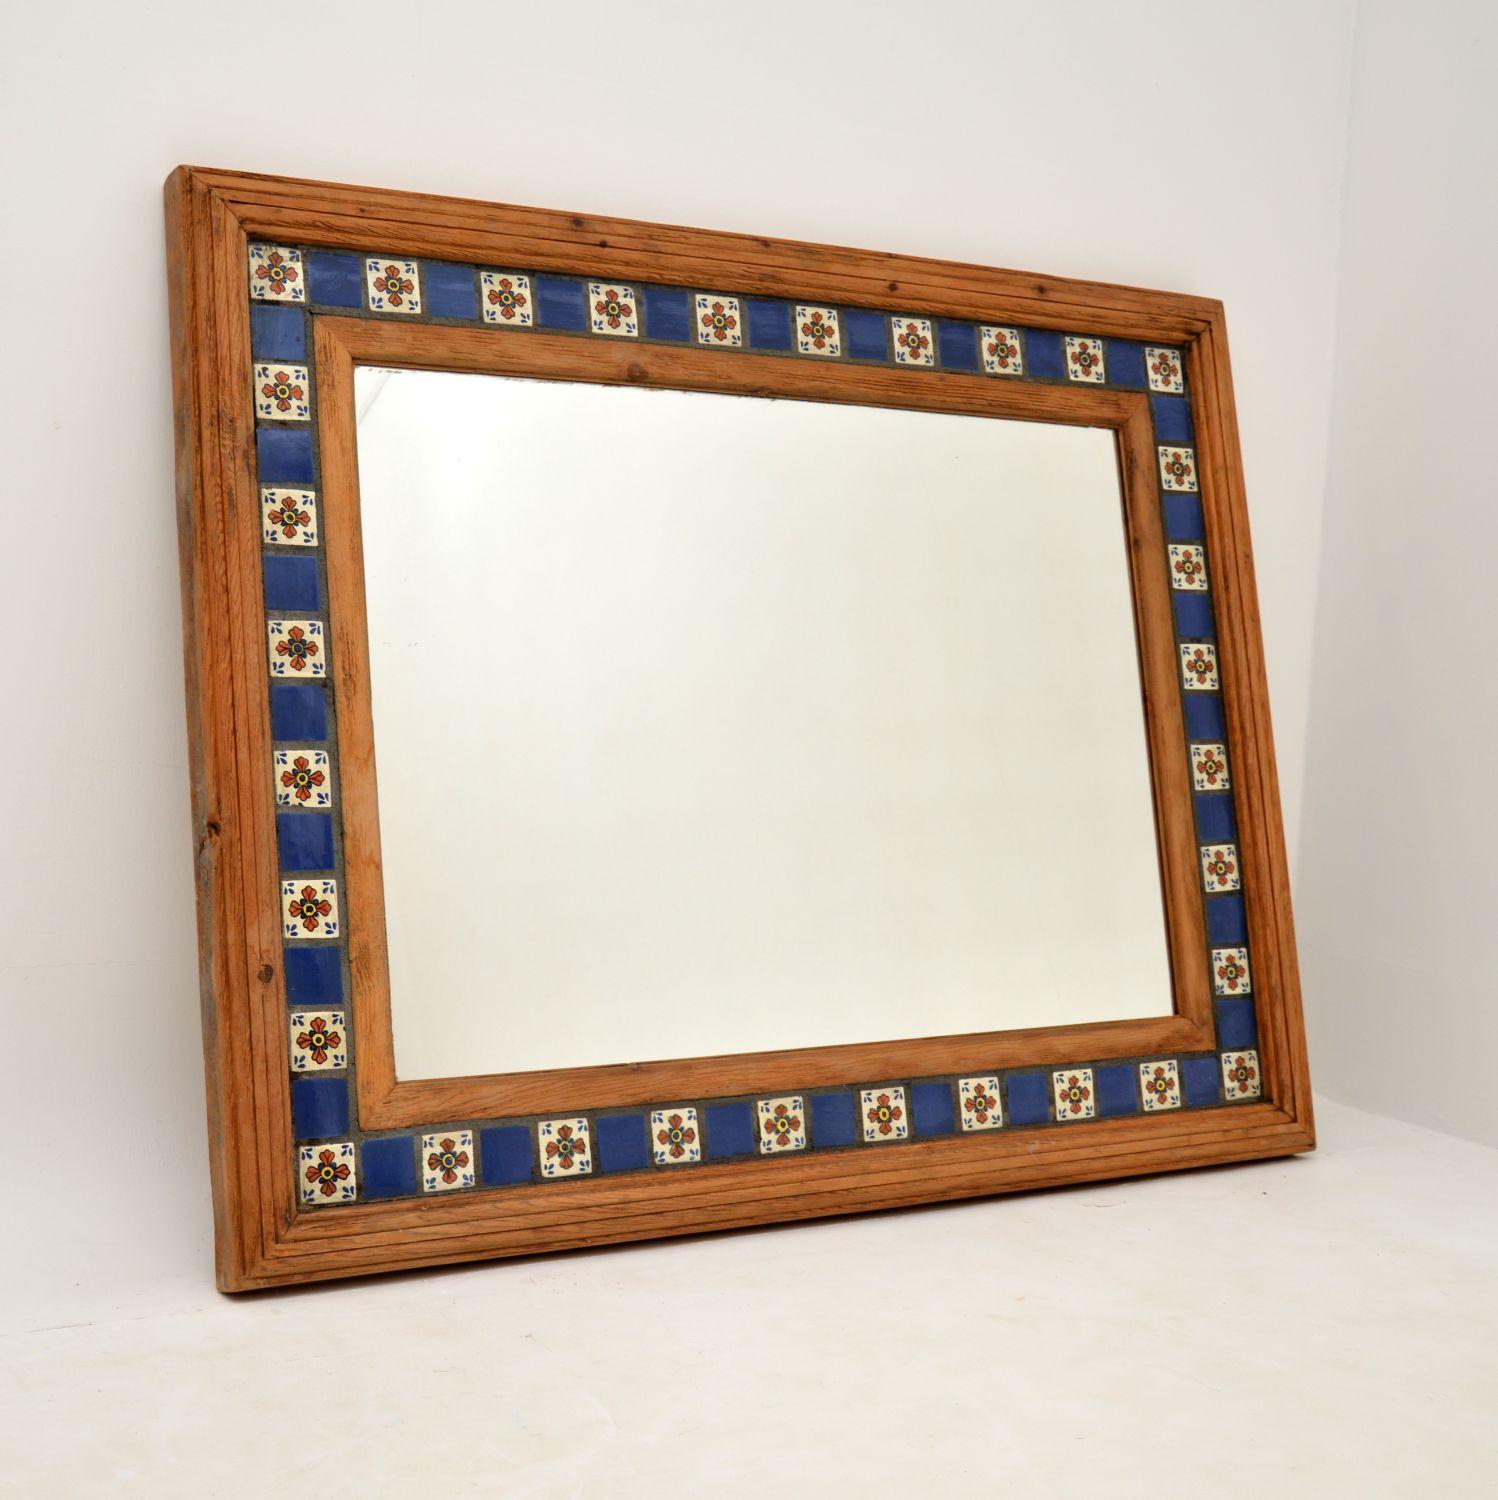 A large and stunning vintage mirror, made in Mexico and dating from around the 1950-60’s.

It is beautifully made from solid wood with a gorgeous inset tiled border.

The quality is excellent and this is a really striking piece, with vibrant